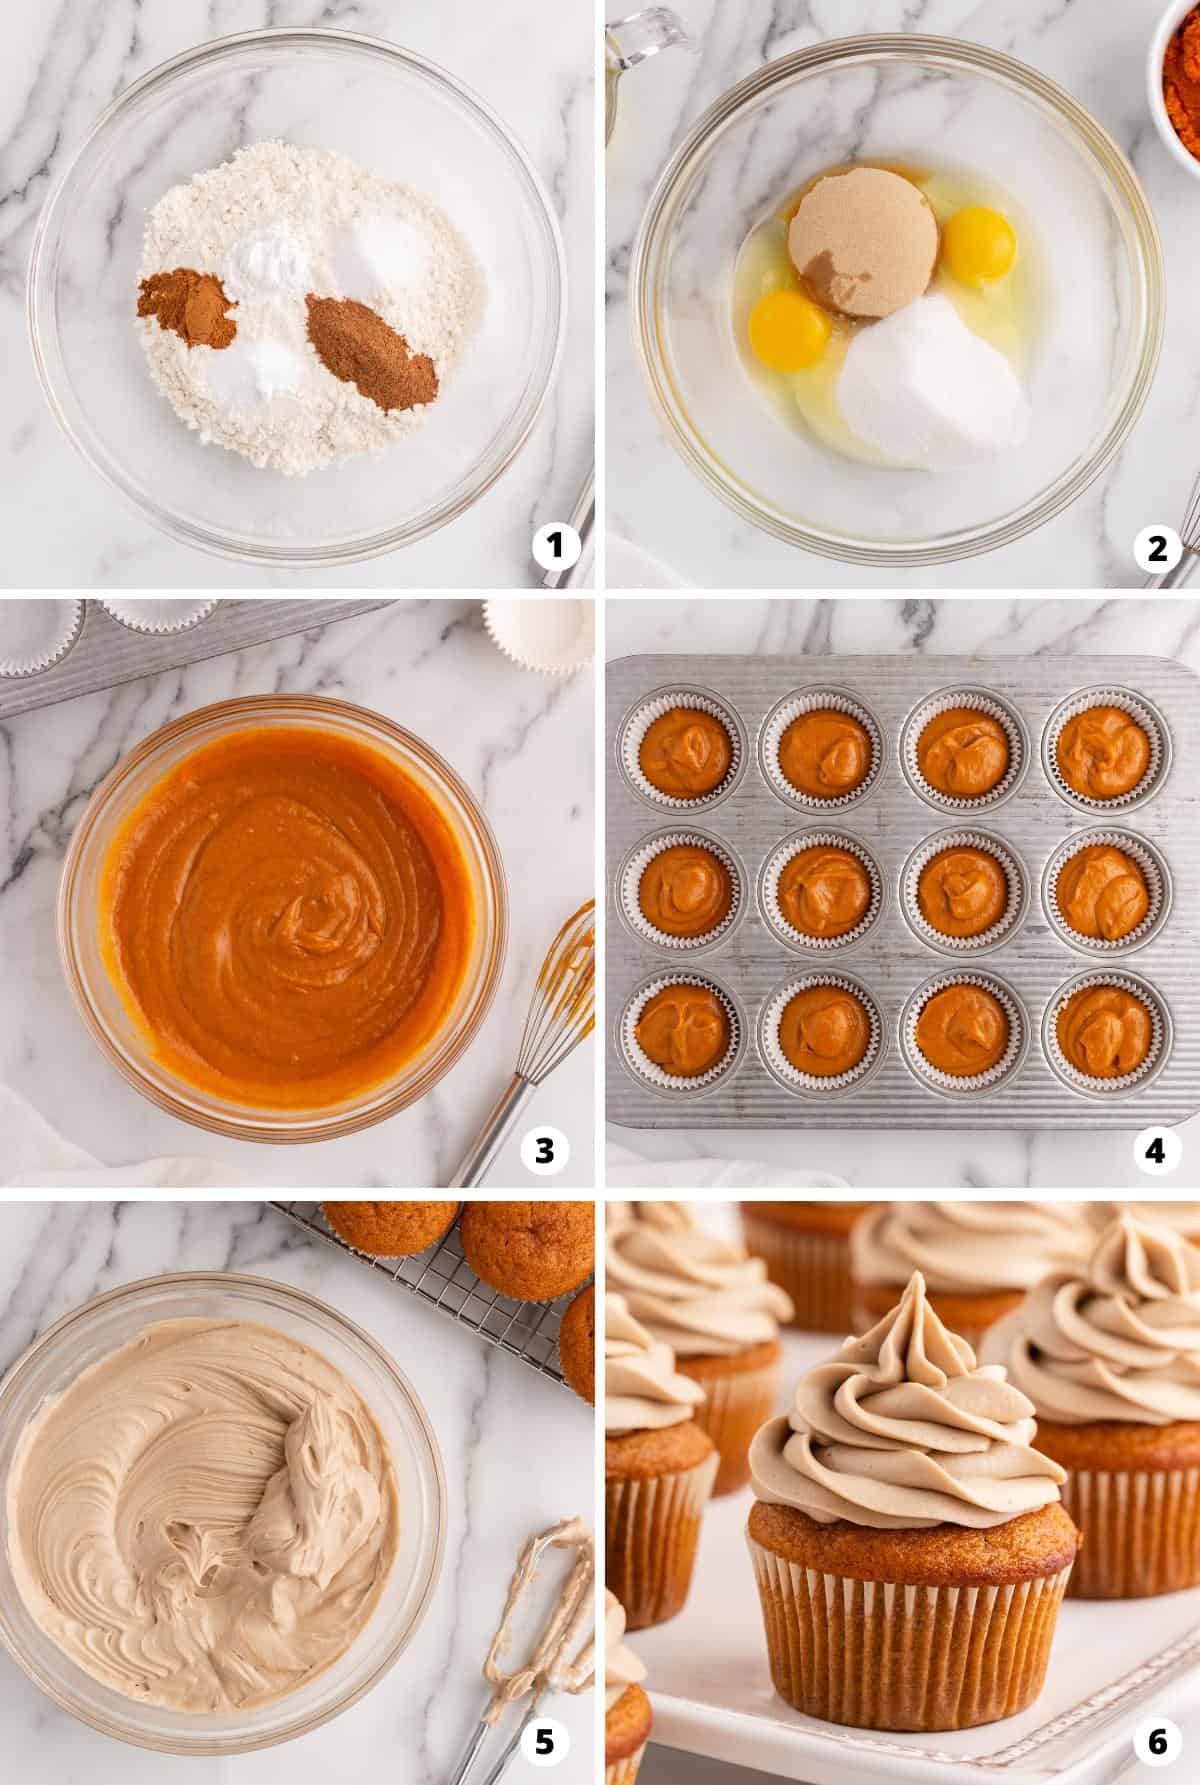 Showing how to make pumpkin cupcakes in a 6 step collage.